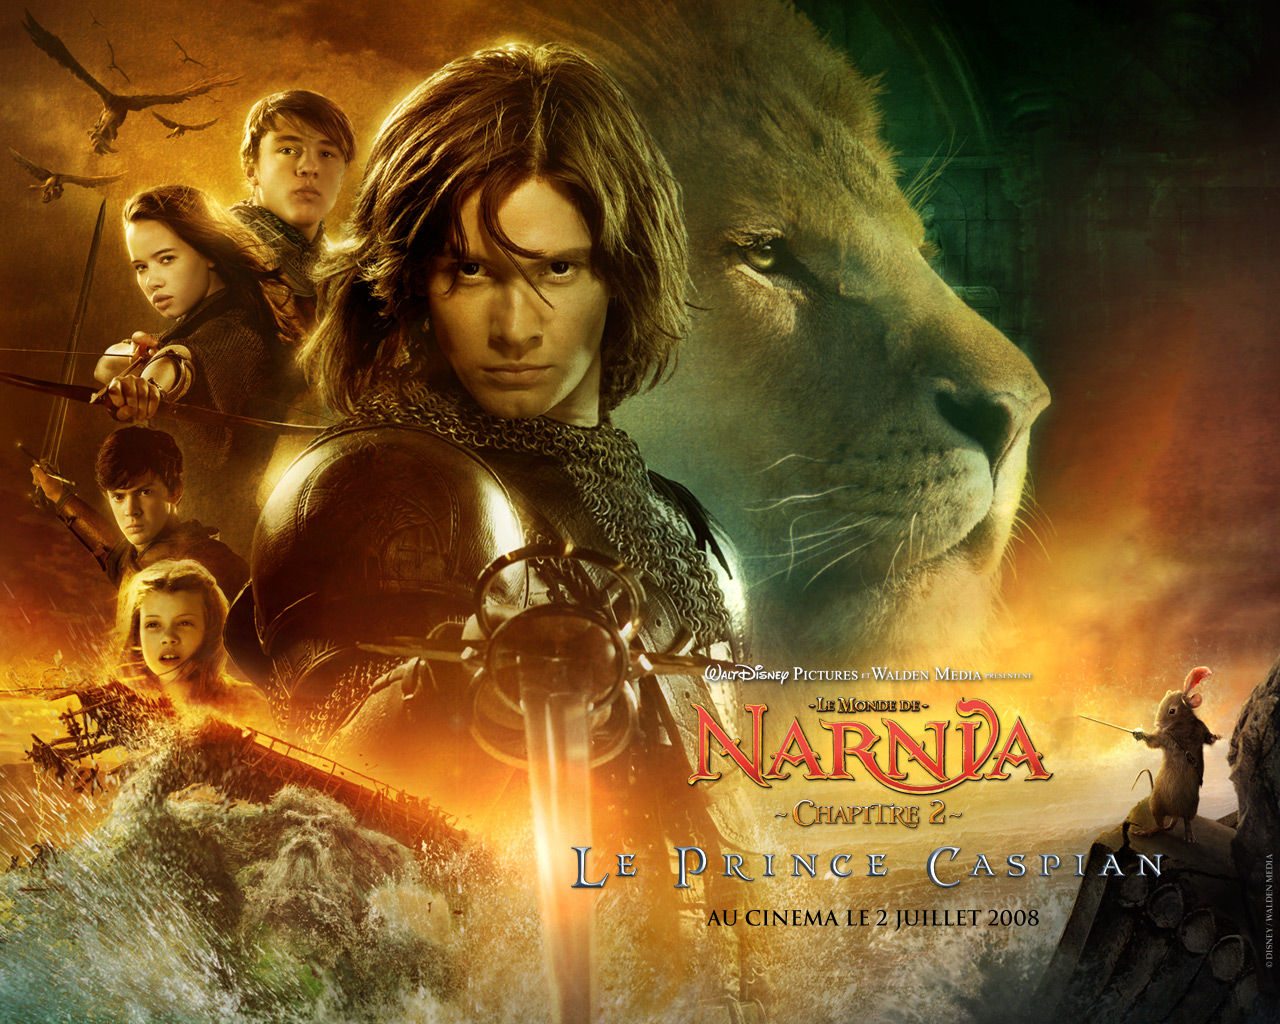 Prince Caspian : The Chronicles of Narnia 2